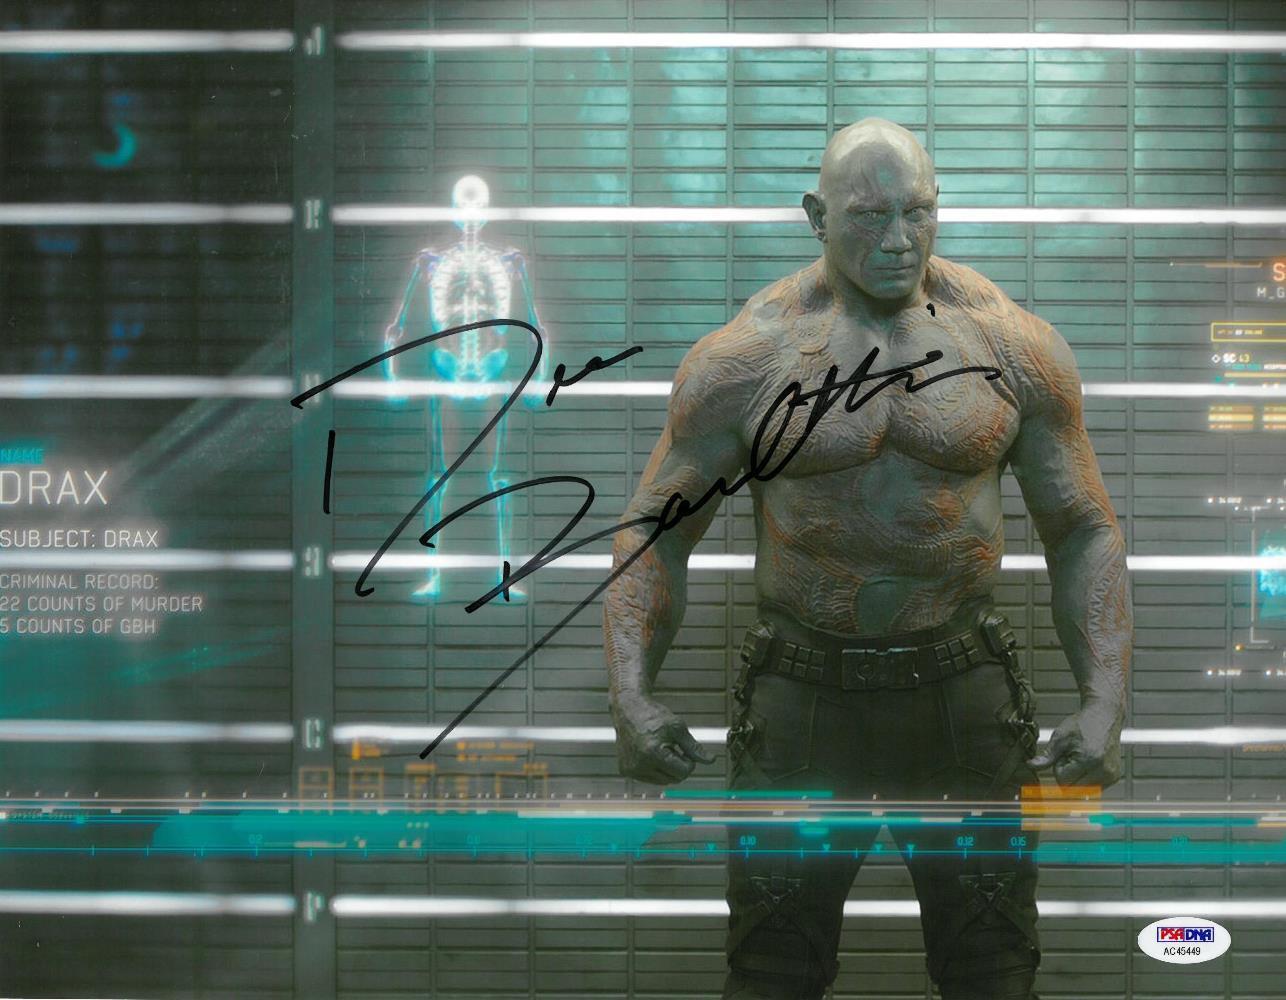 Dave Bautista Signed Guardians of the Galaxy Autographed 11x14 Photo Poster painting PSA#AC45449